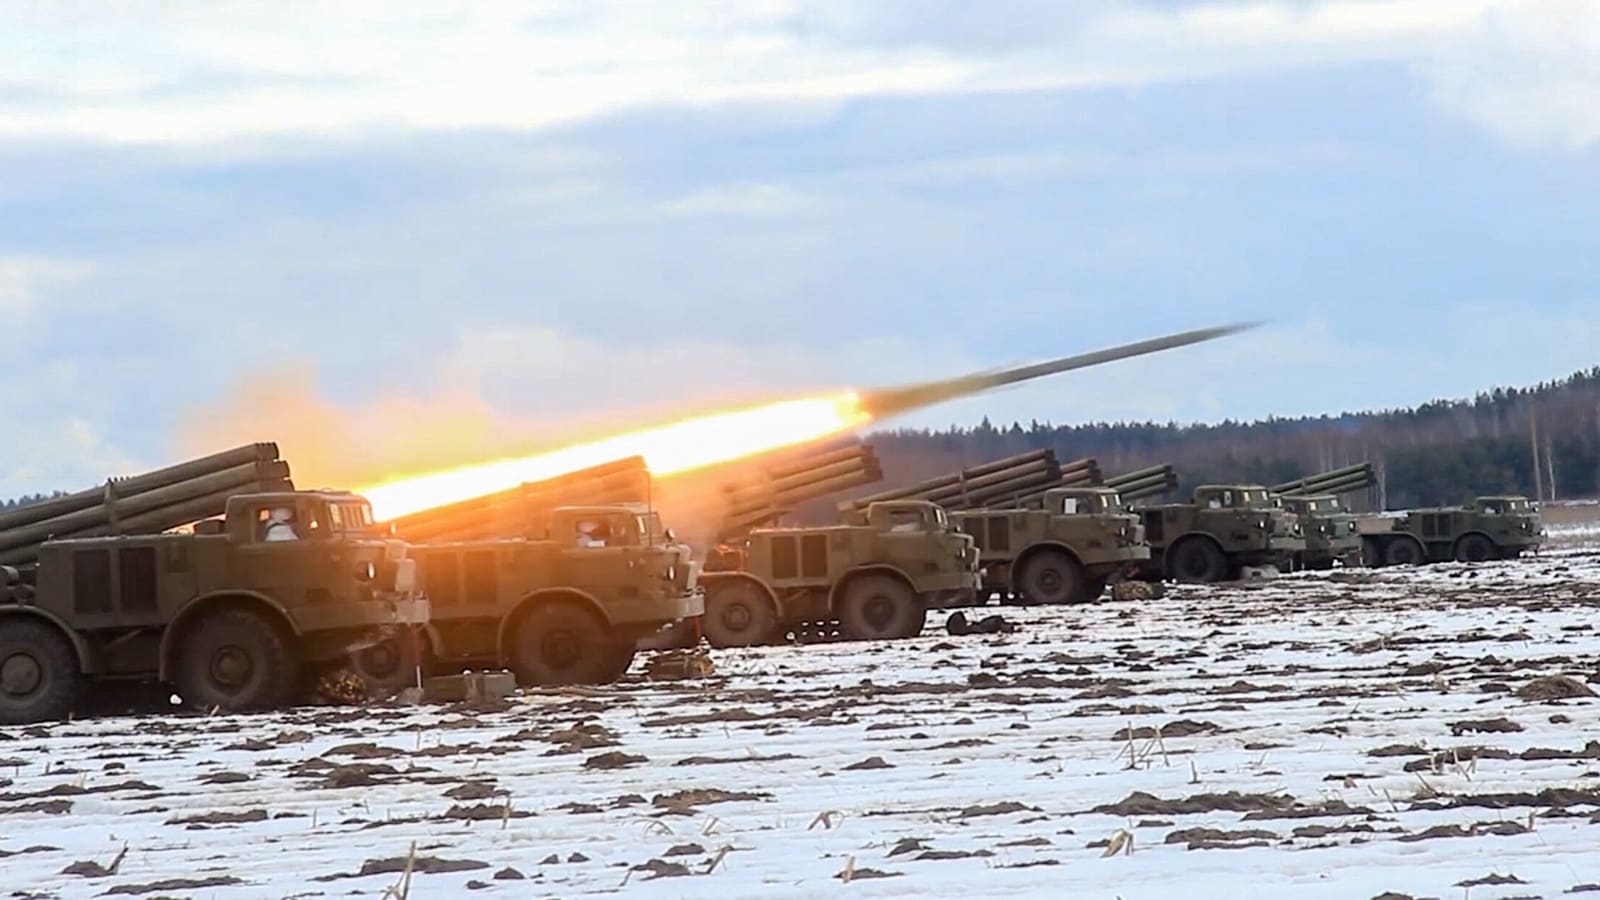 From Kalibr missiles to Smerch rockets: The weapons Russia is using on